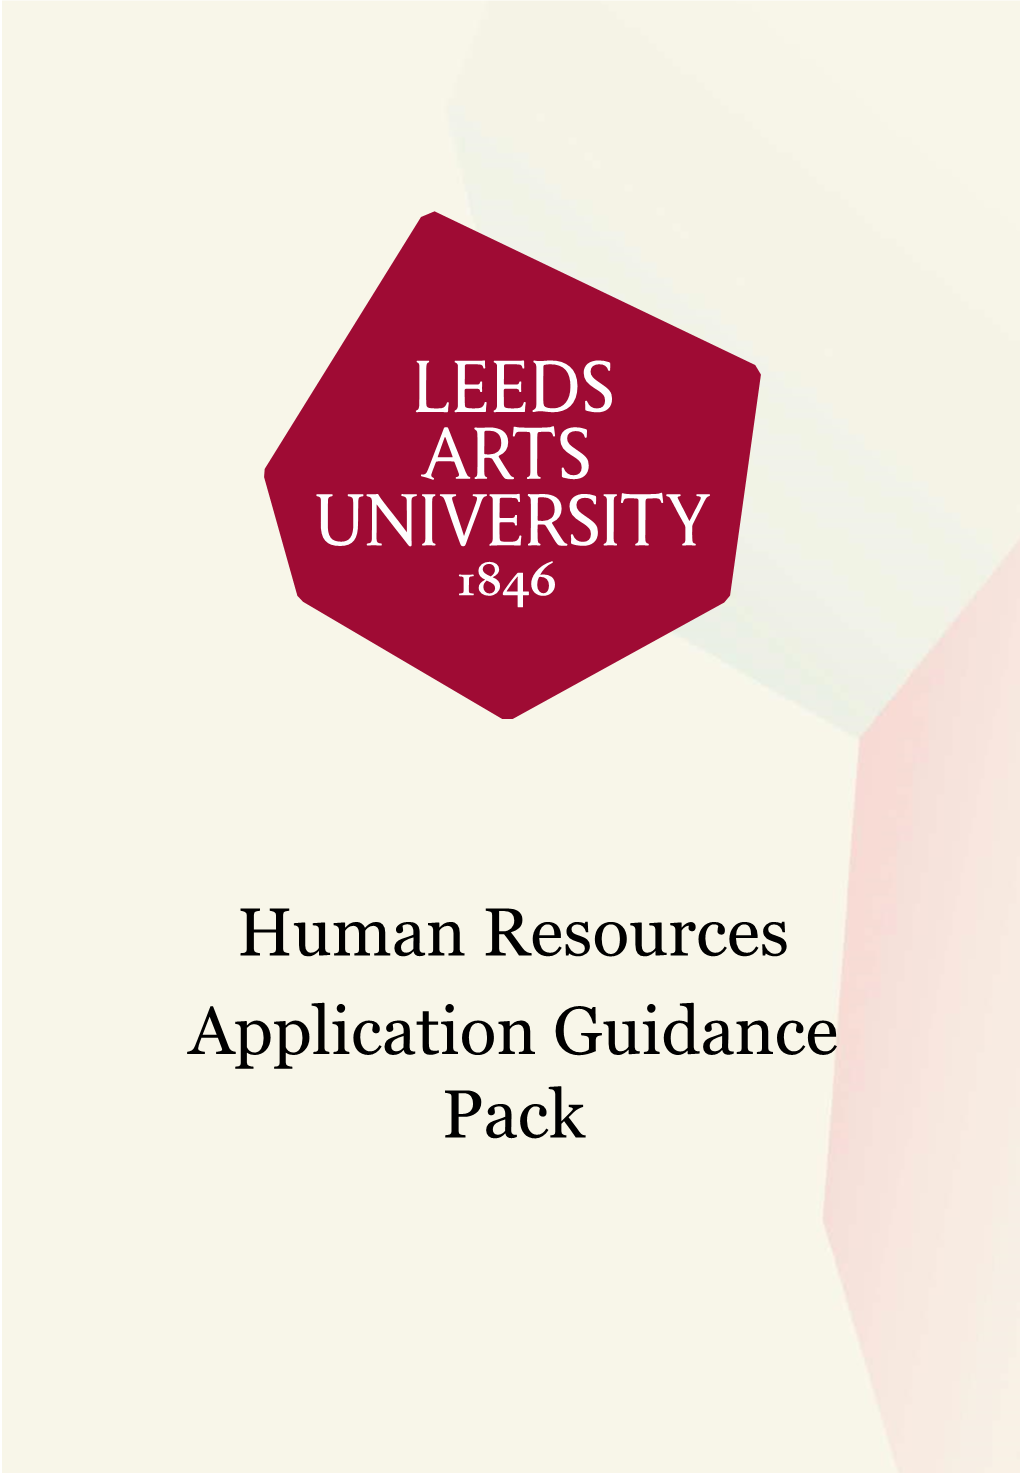 Human Resources Application Guidance Pack